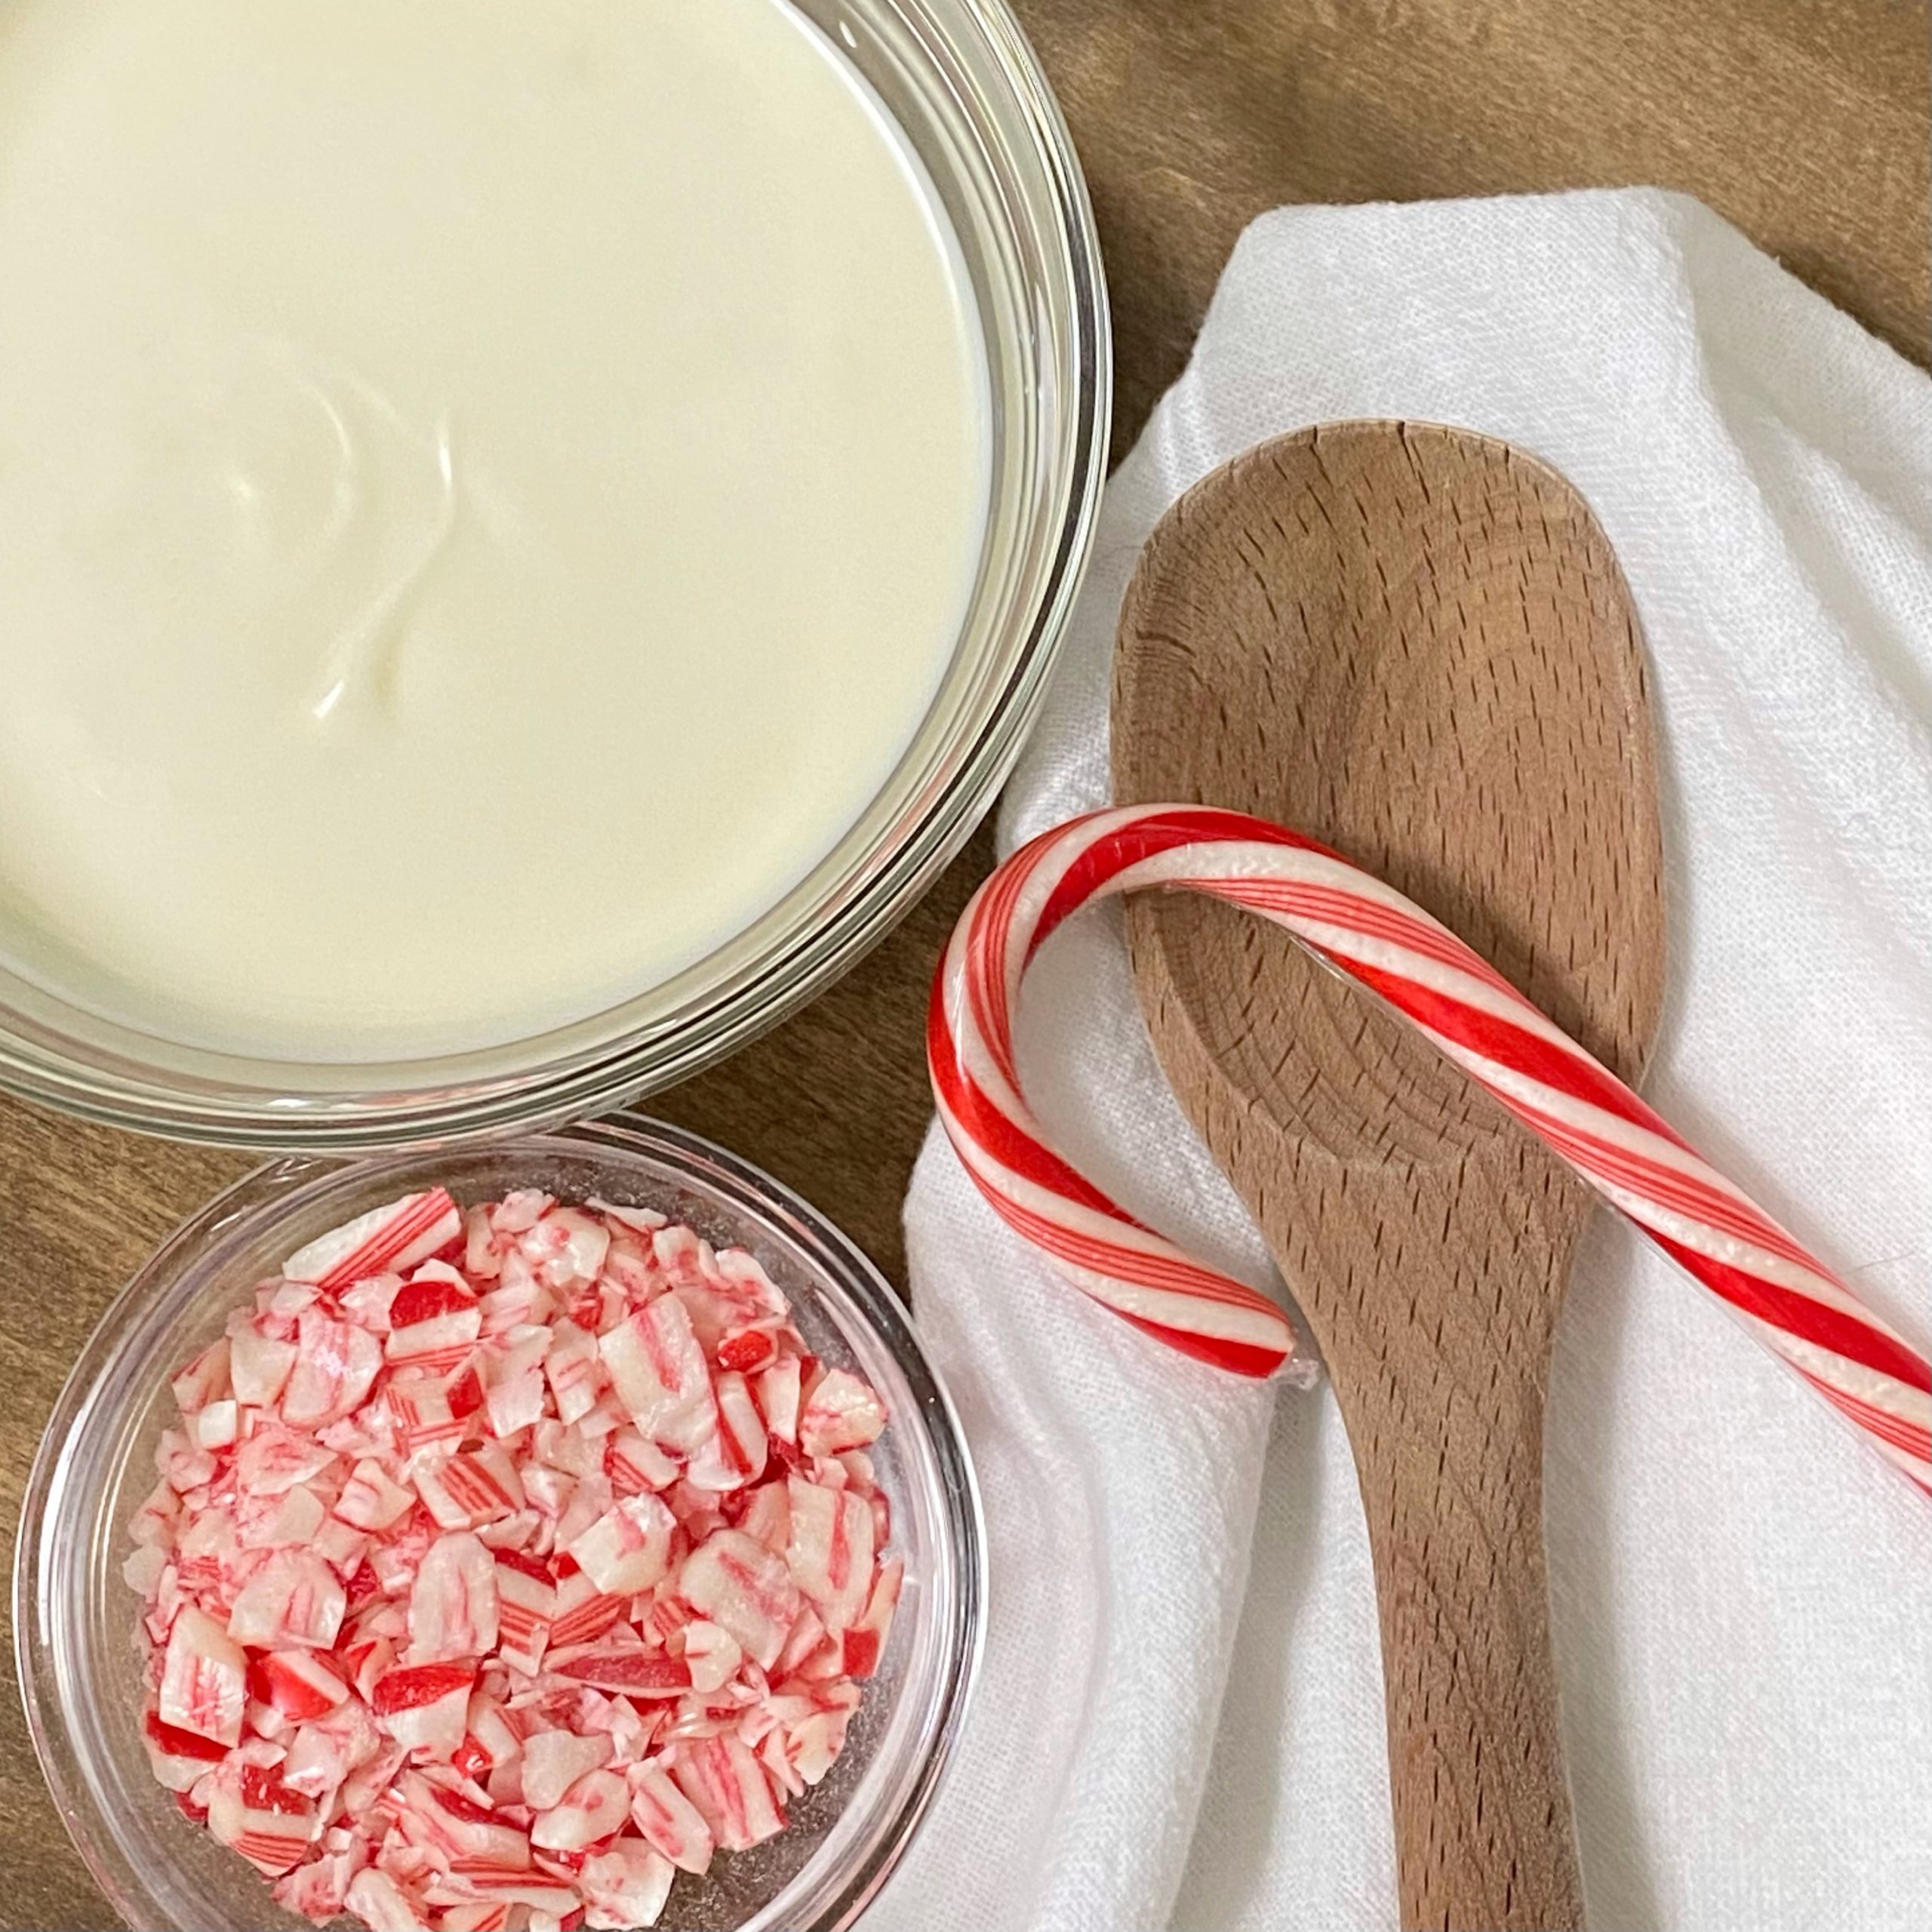 White chocolate melted in a glass bowl with crushed candy cane in another glass bowl next to it. Beside them are a white towel and wooden spoon.